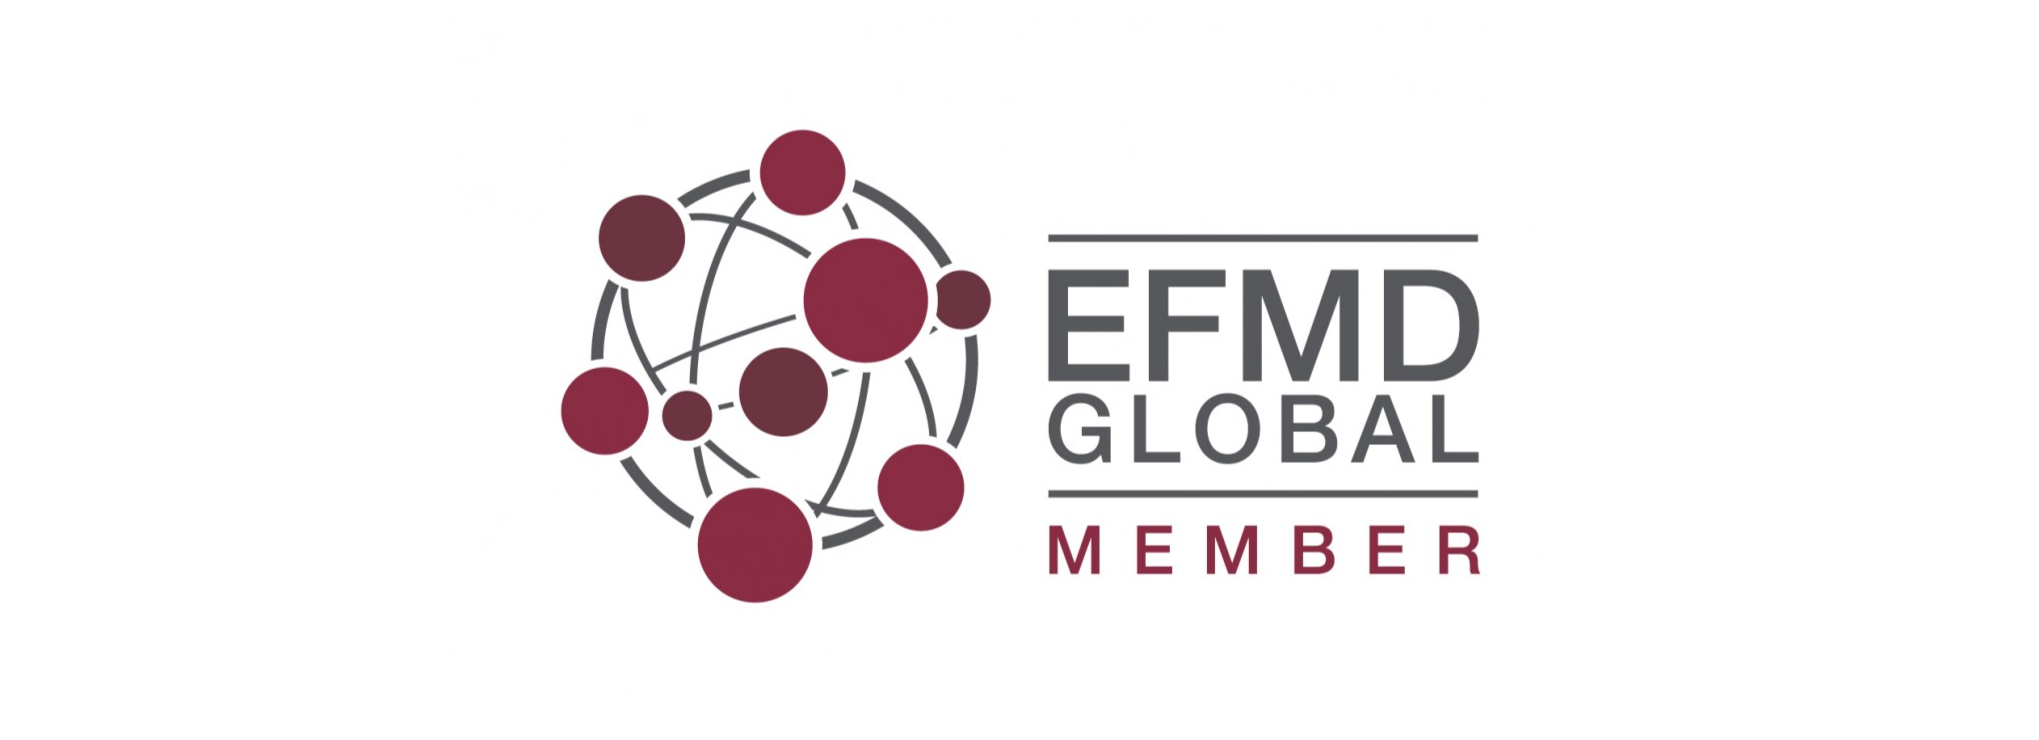 The Department of Business Administration of UC3M is now a member of the EFMD.